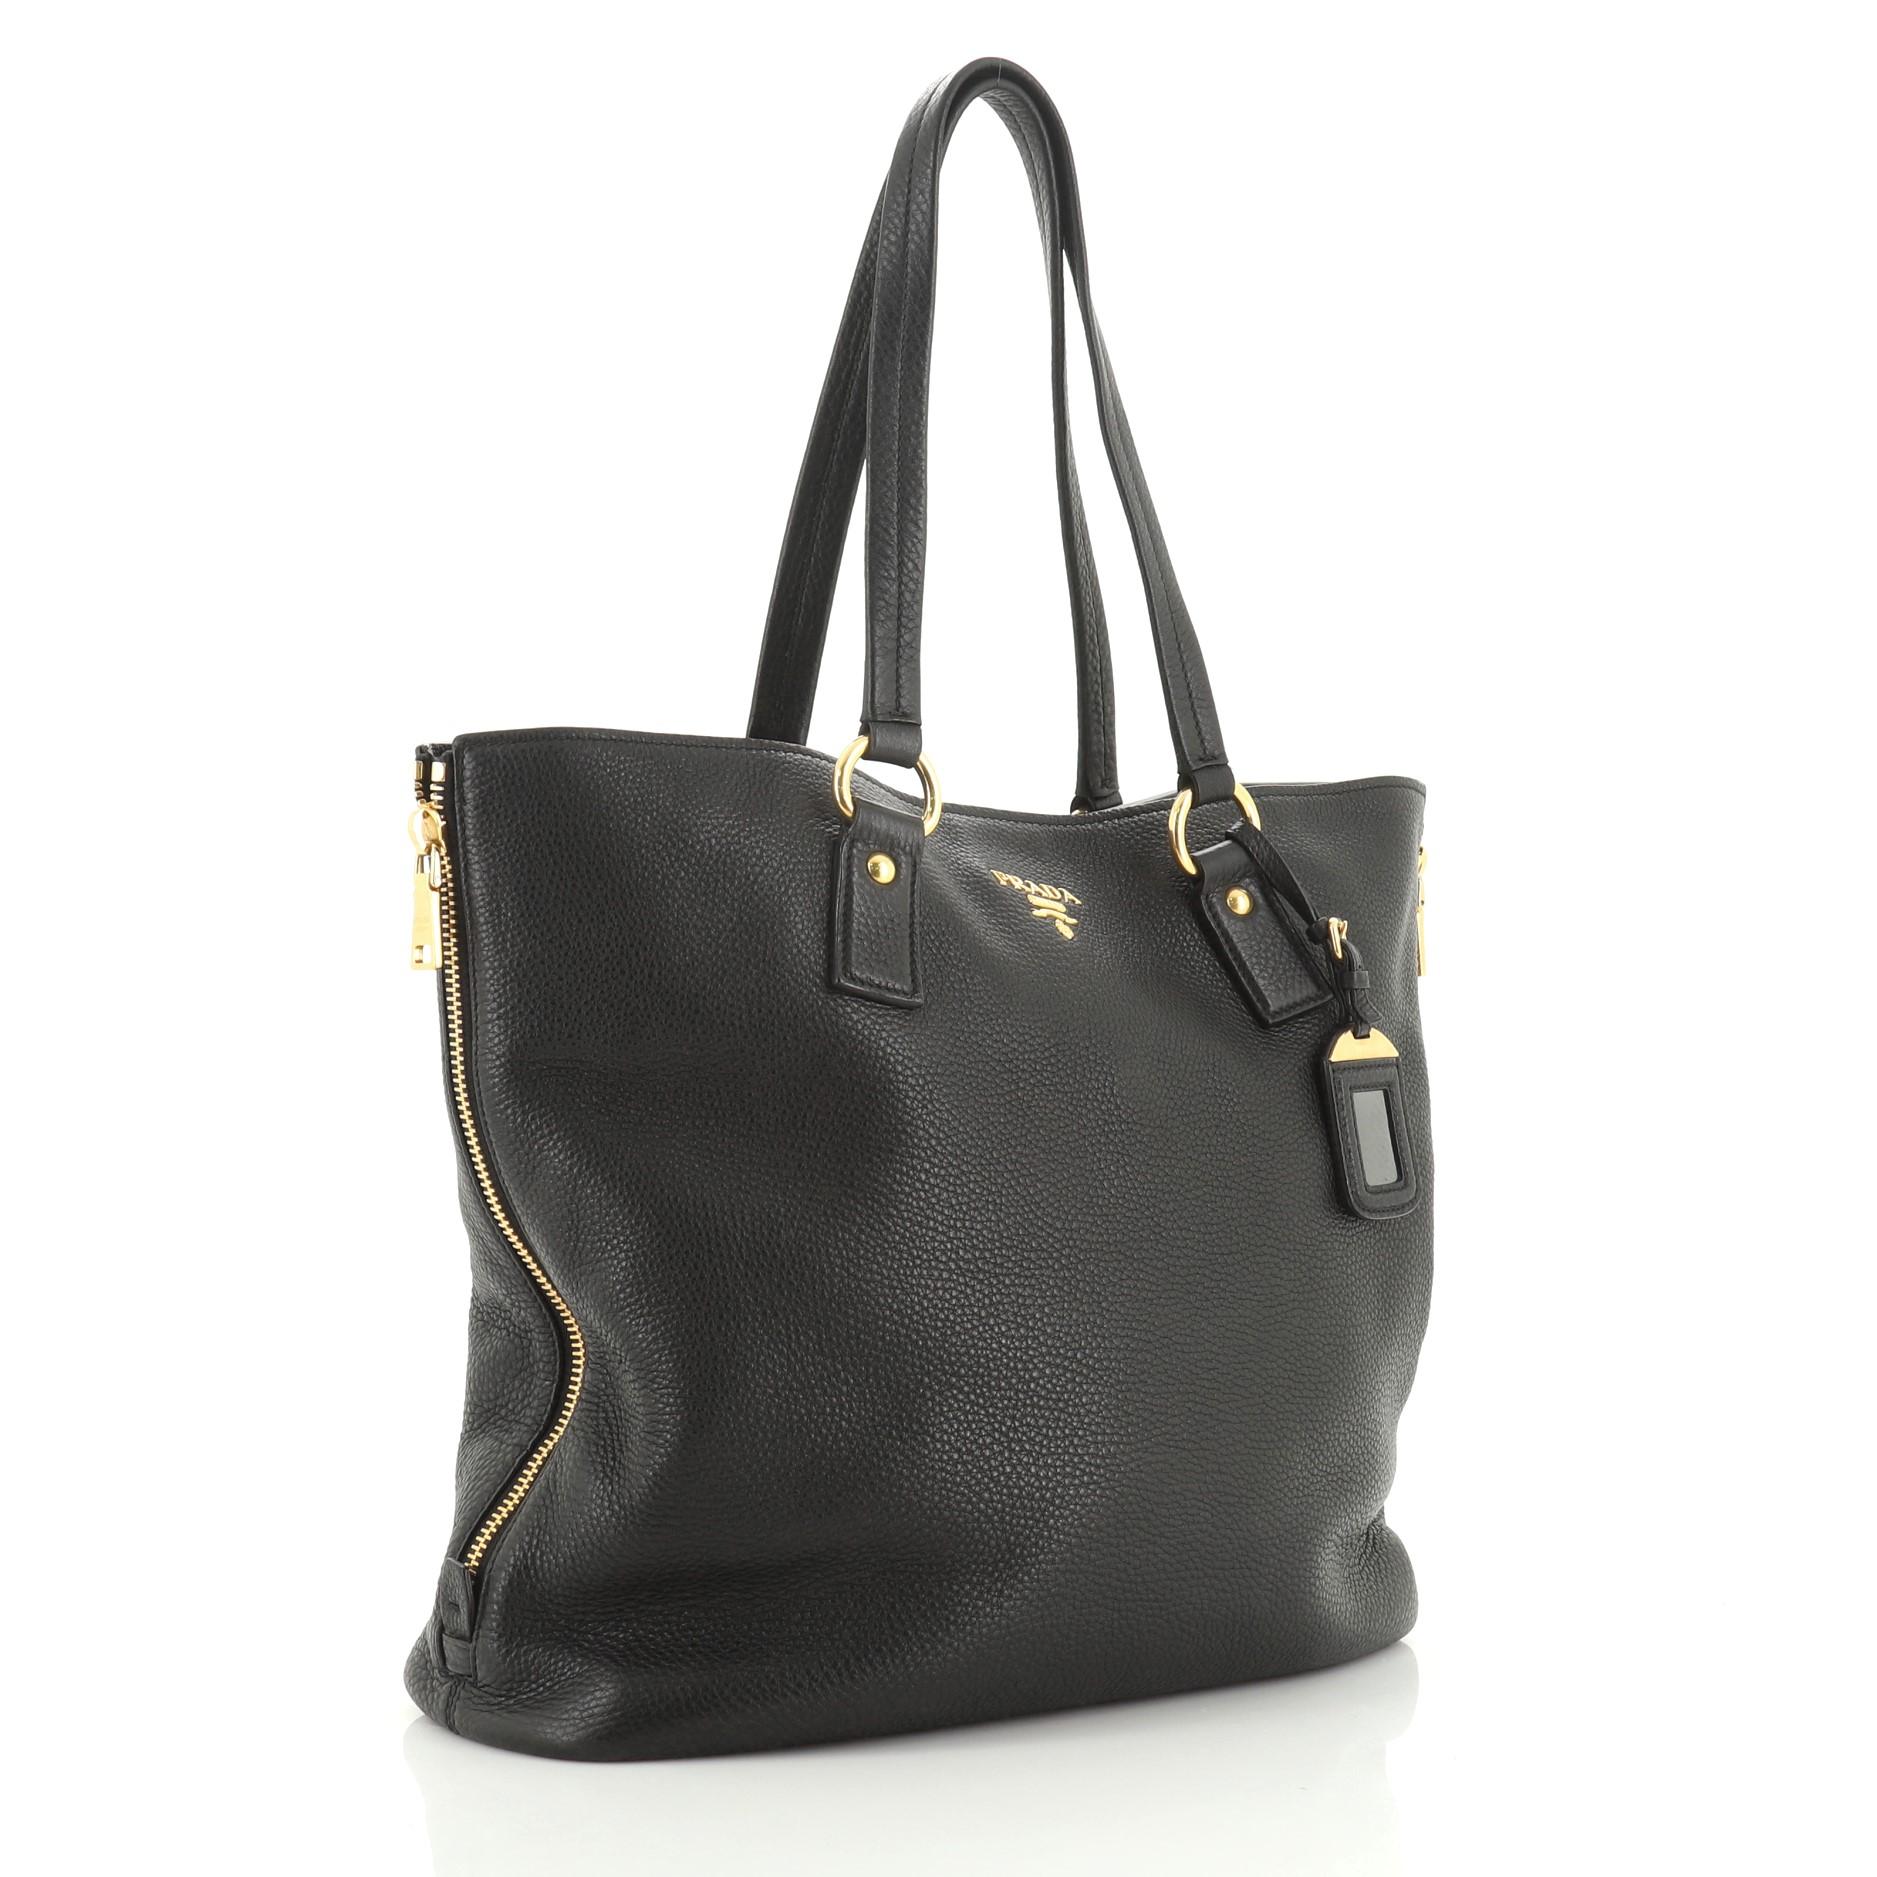 This Prada Side Zip Shopper Tote Vitello Daino Large, crafted from black vitello daino leather, features dual tall flat leather handles, zippered side gussets, and gold-tone hardware. Its snap closure opens to a black fabric interior with side zip